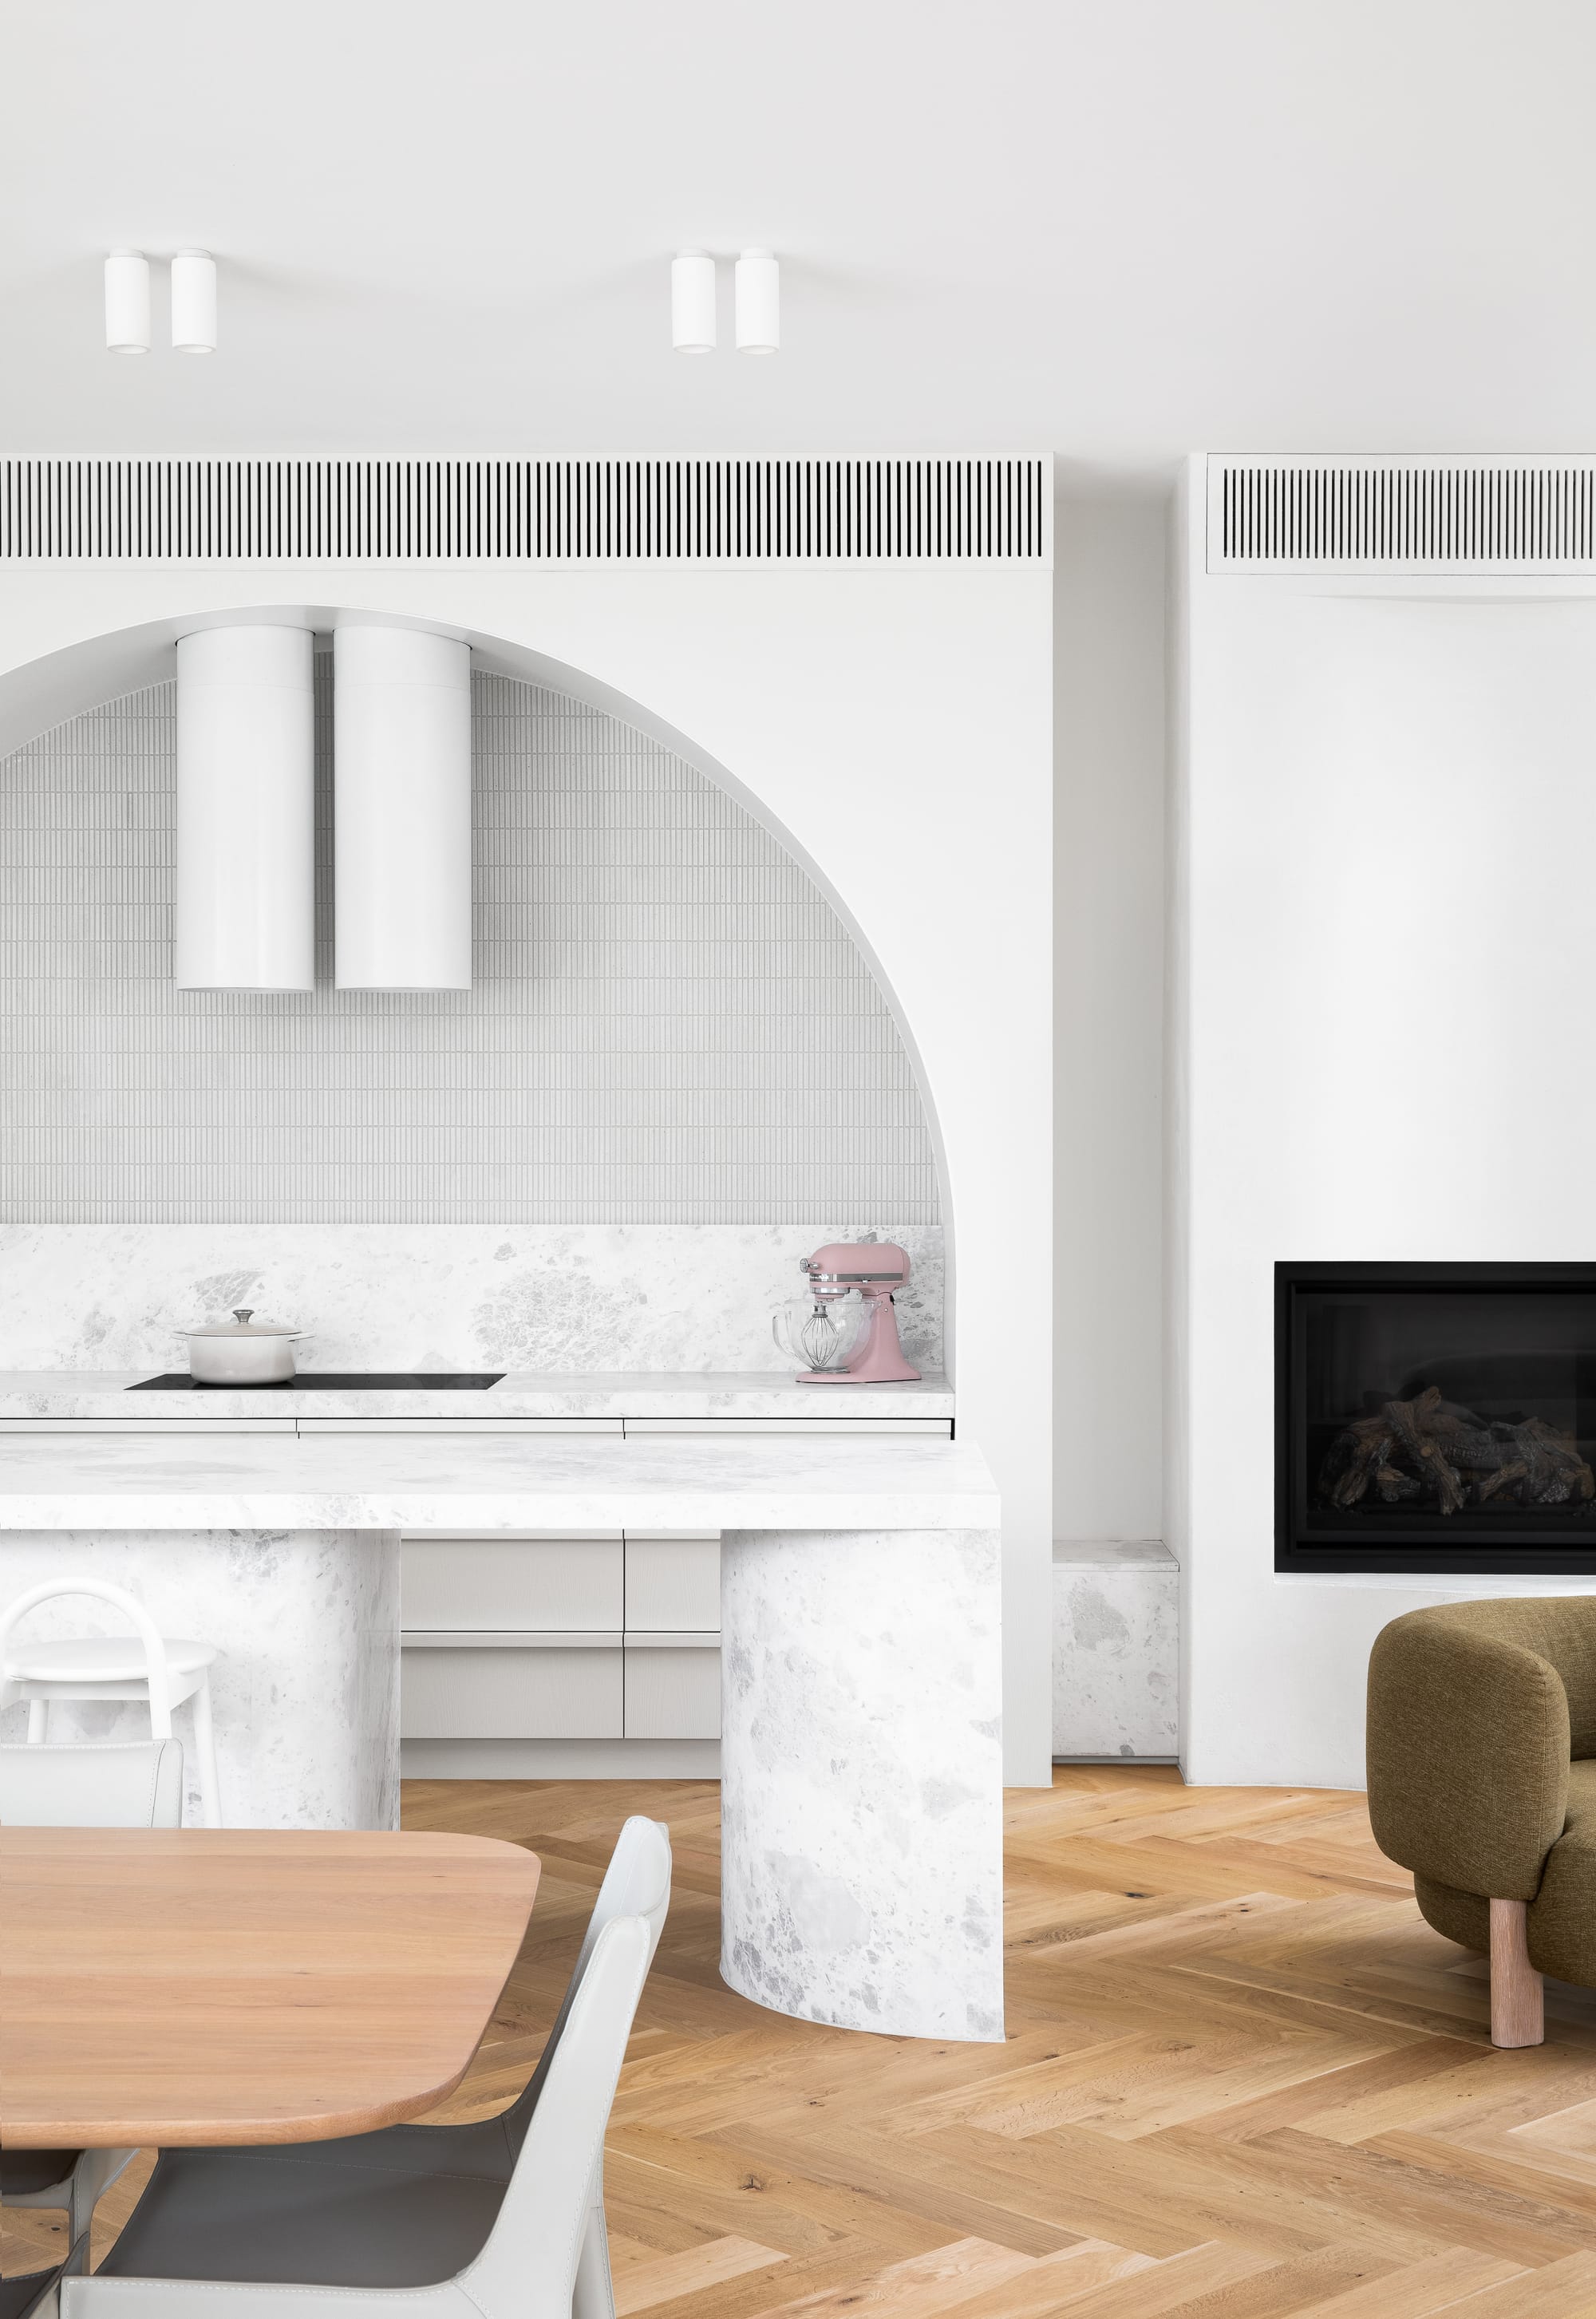 The Grove by Taouk Architects.A minimalist kitchen interior with a white marble island and a built-in cooktop under an arching range hood set against a tiled backsplash. To the right is a living area with a modern black fireplace. The space features herringbone wood flooring, white chairs around a wooden dining table, and a plush green armchair. The clean lines and white color palette give the room an open, serene feel.